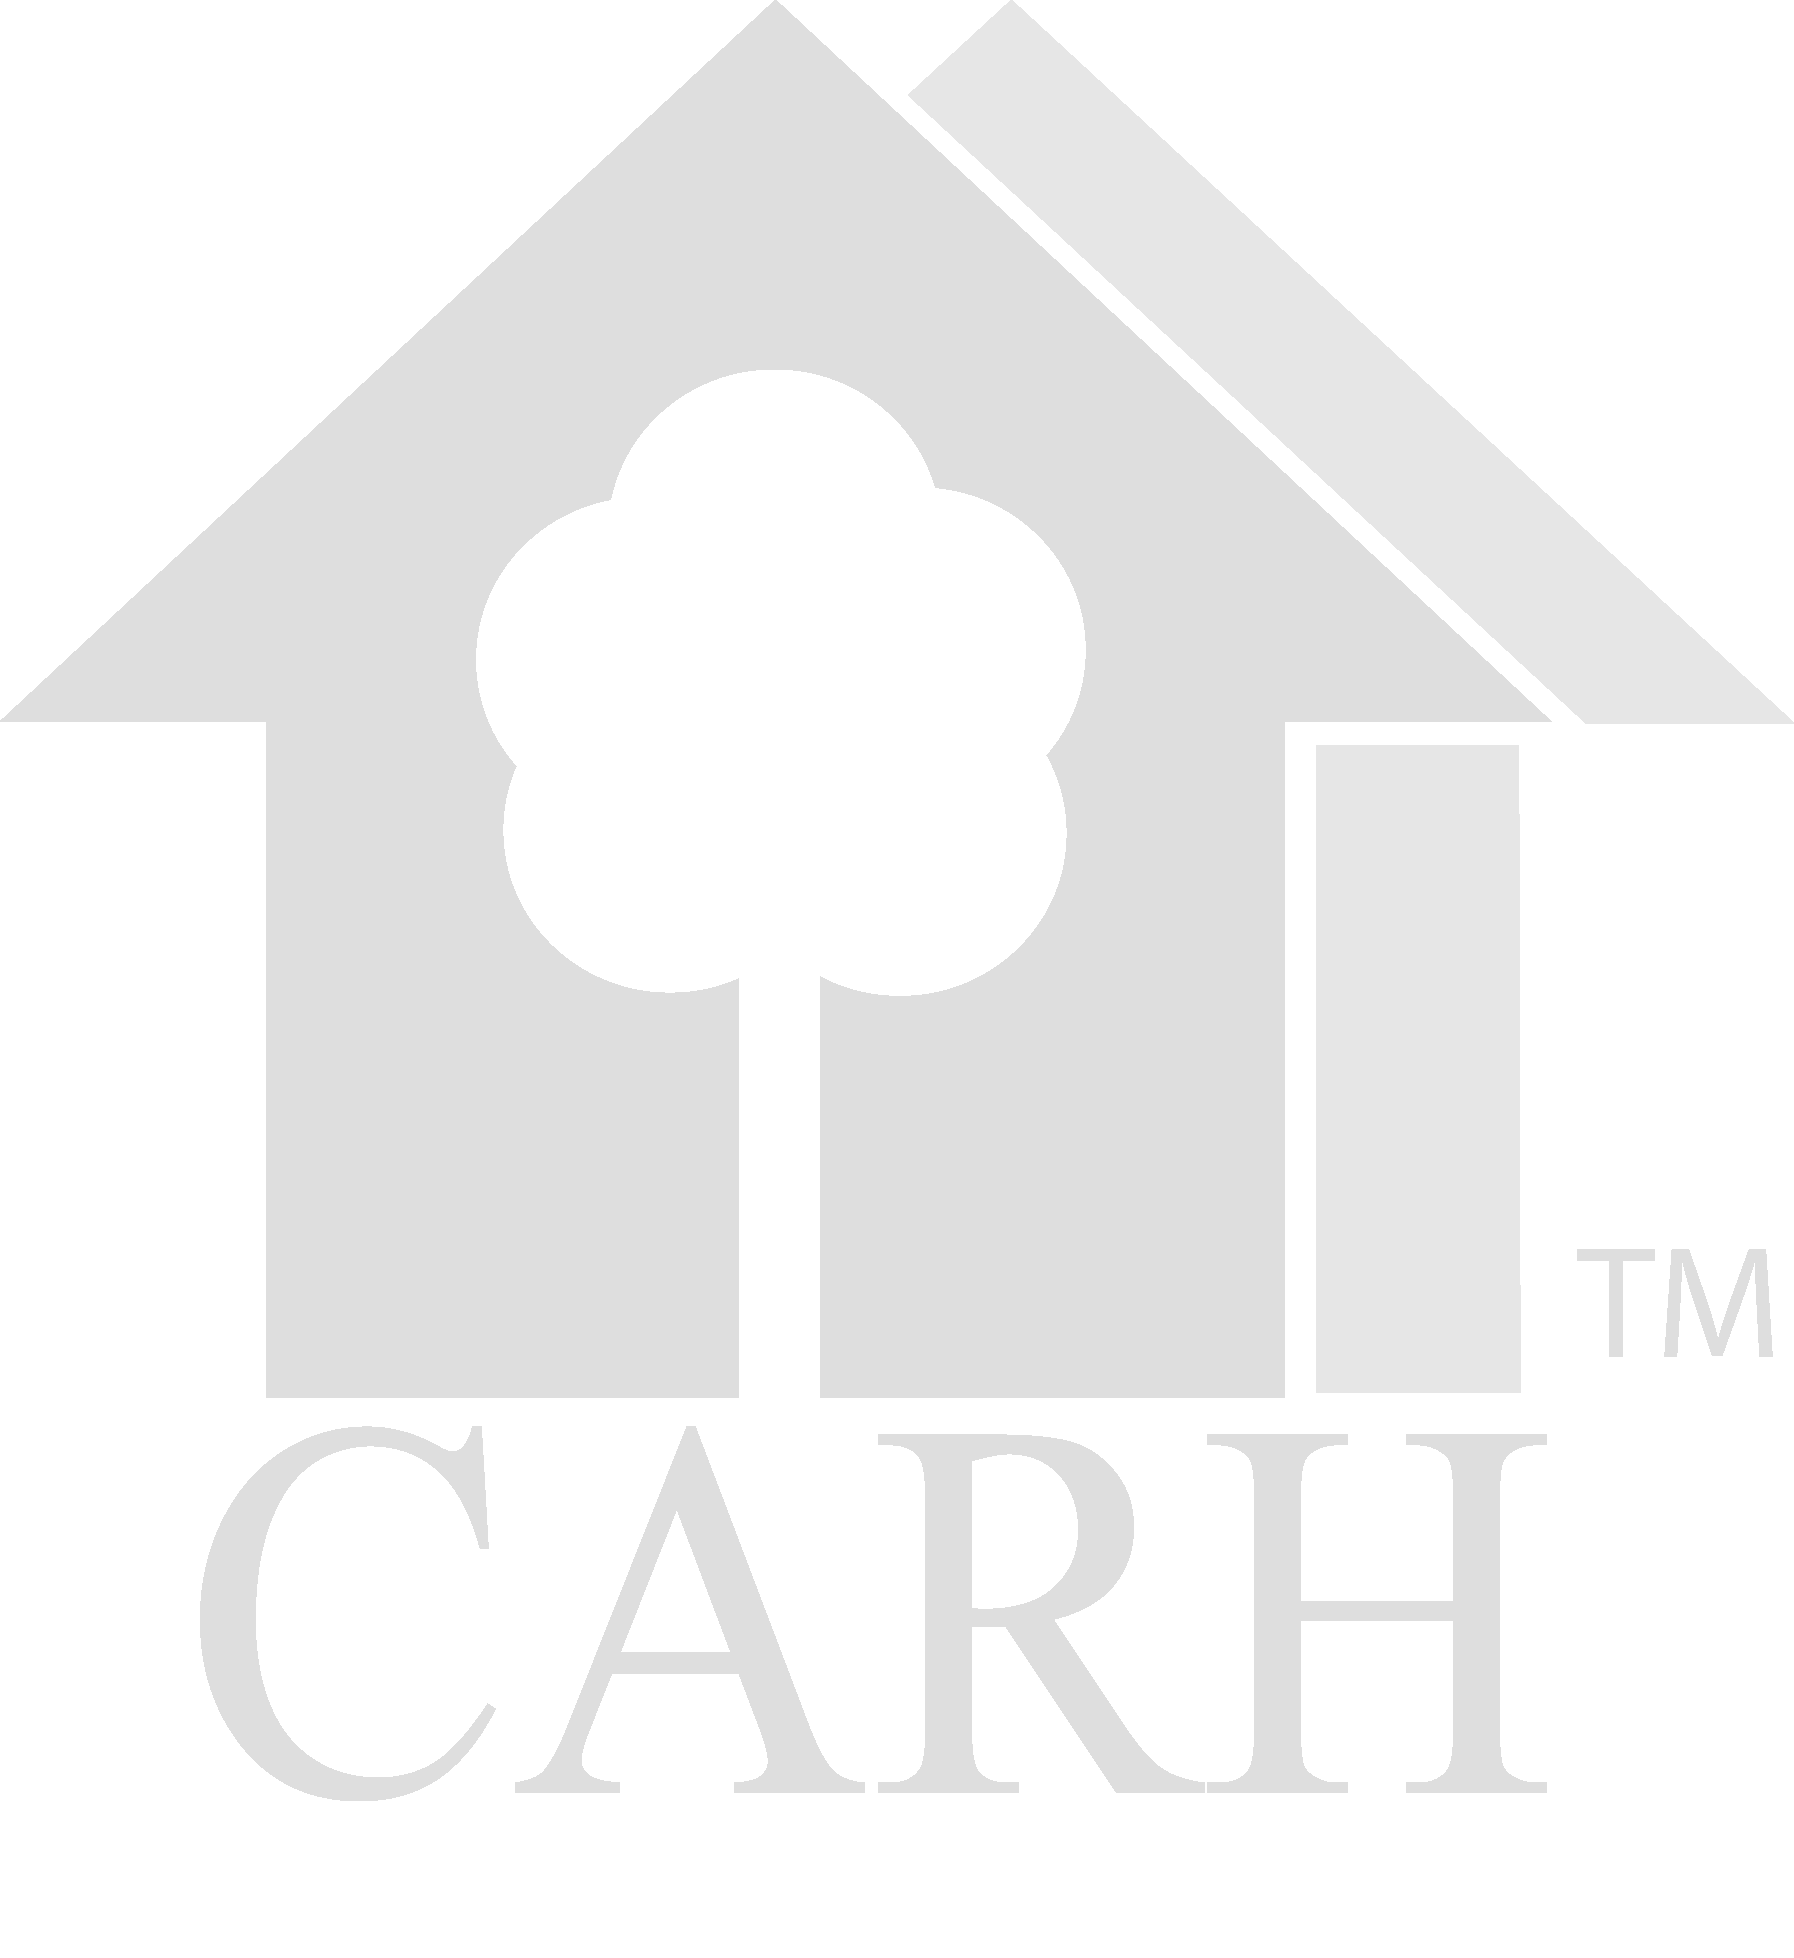 Council for Affordable and Rural Housing (CARH)